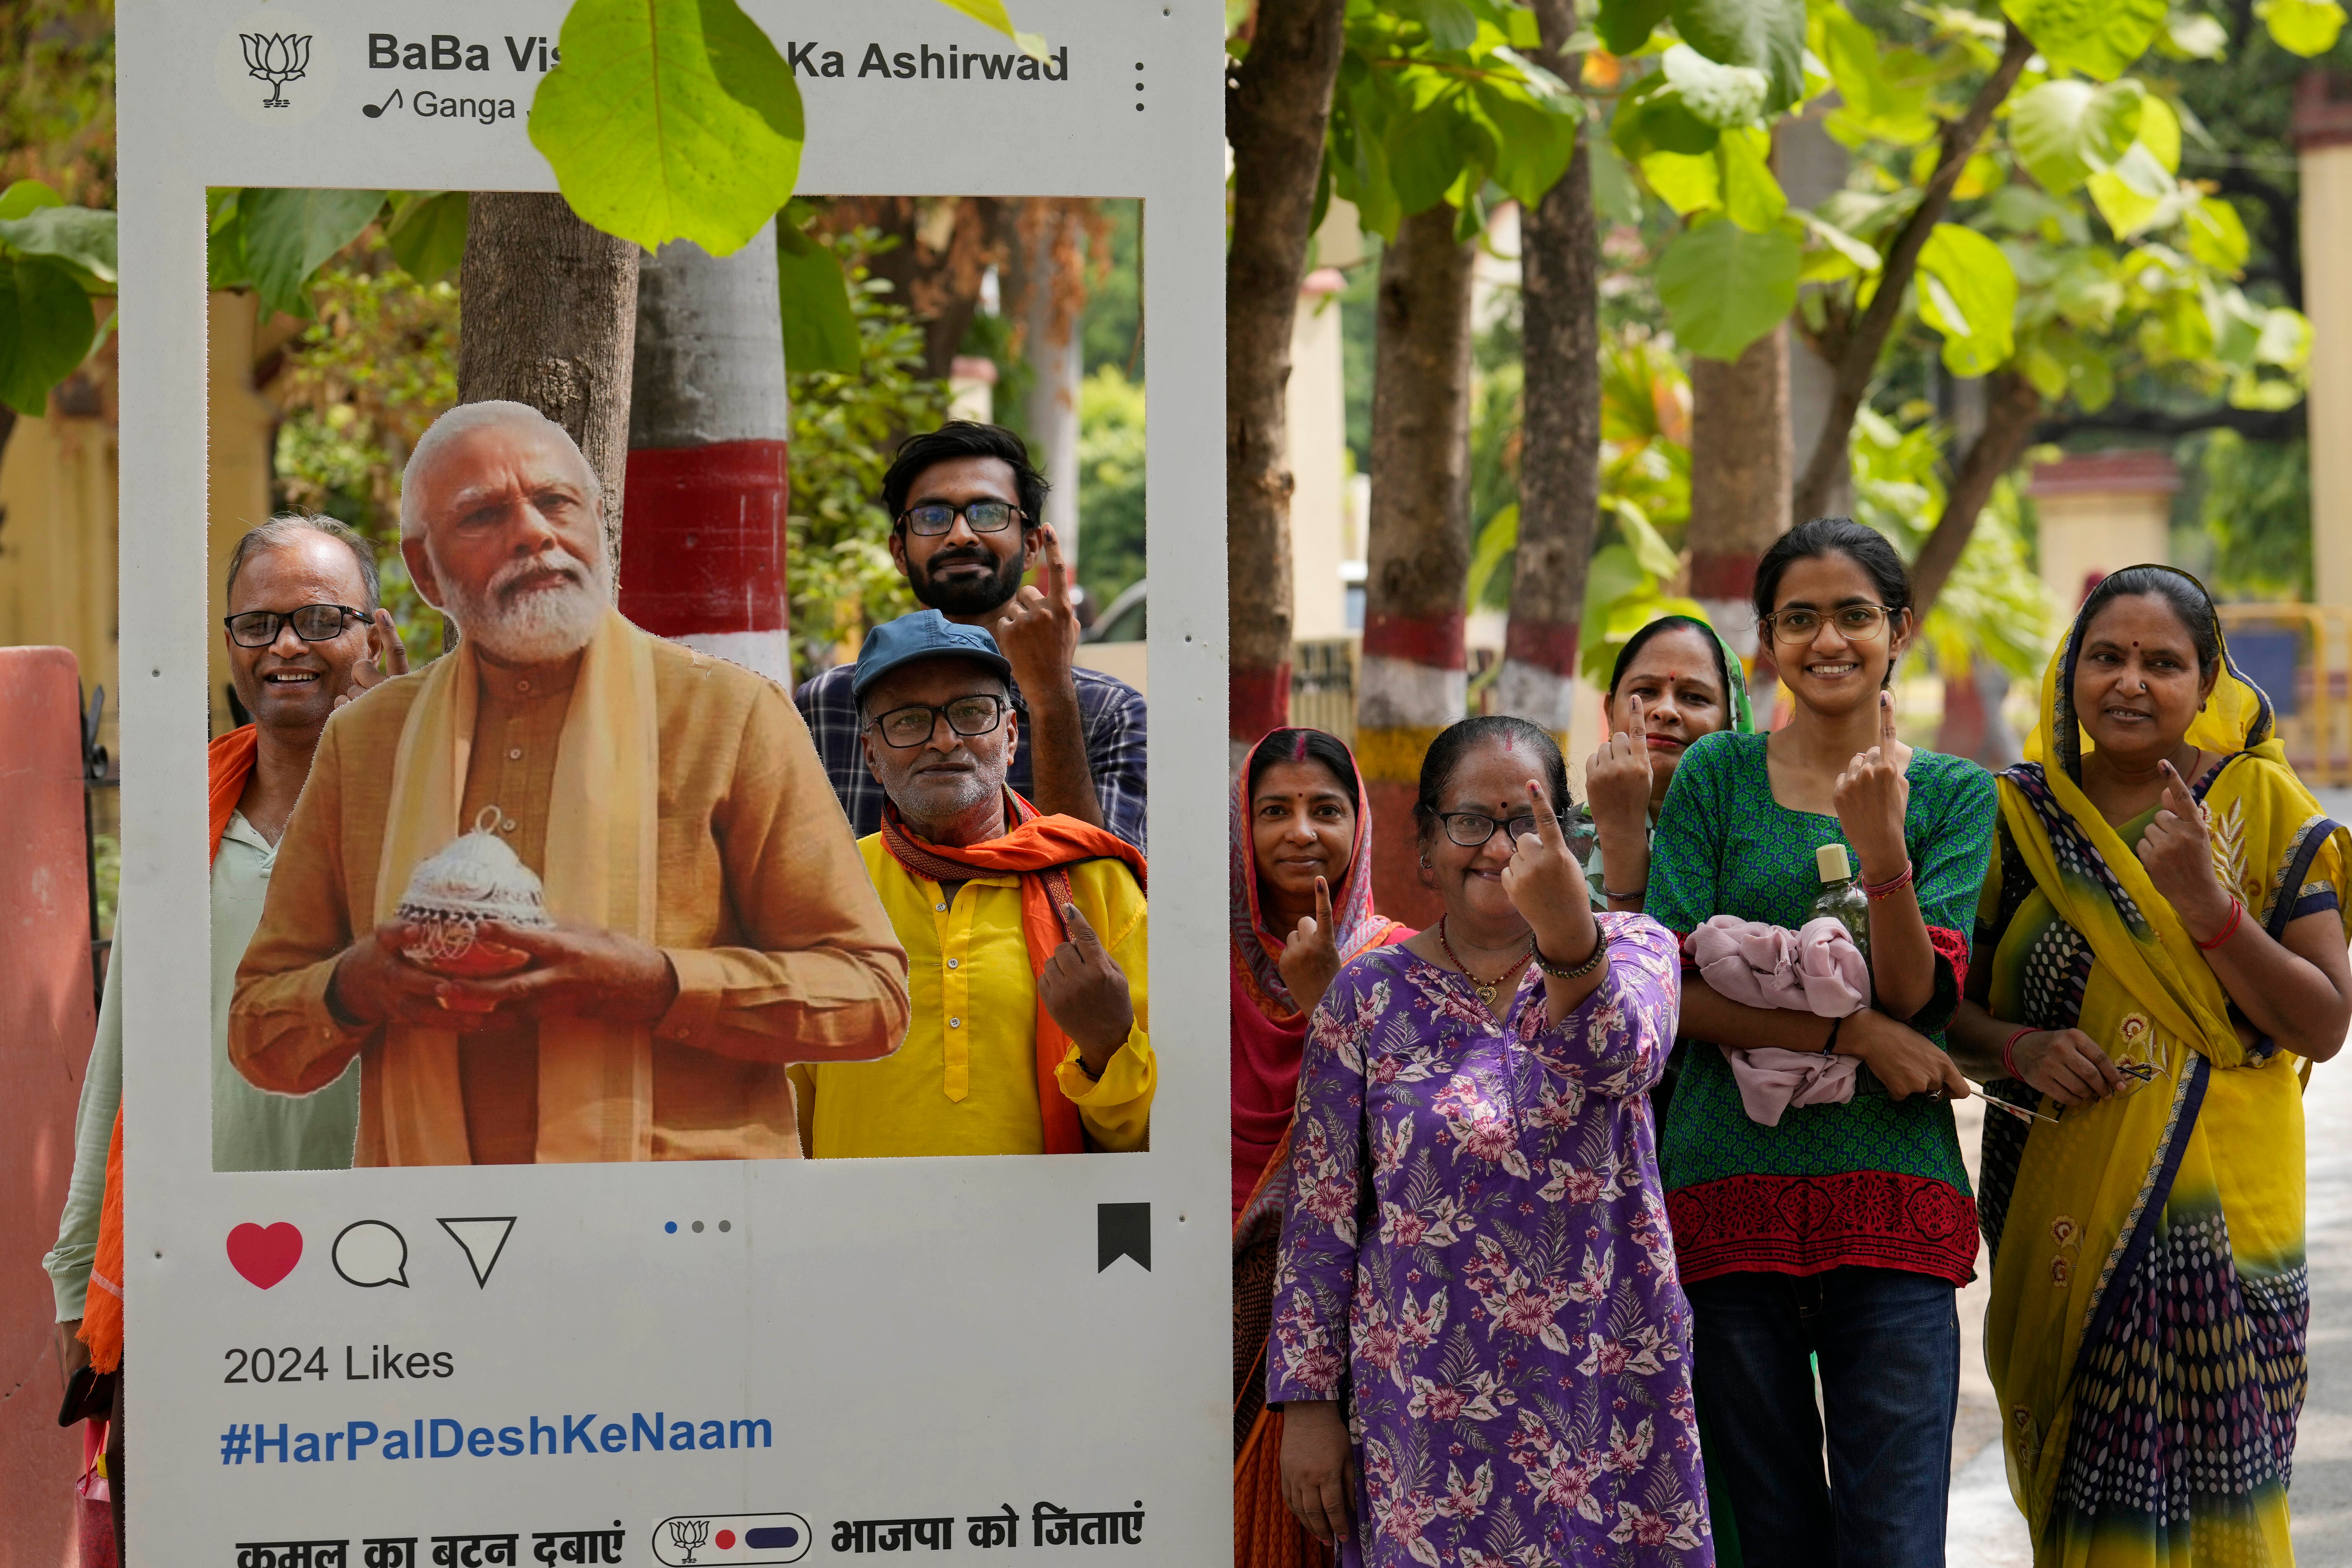 The alliance led by Indian Prime Minister Narendra Modi's Bharatiya Janata Party (BJP) is expected to win a large majority in the general election that ends on Saturday, TV polls said.